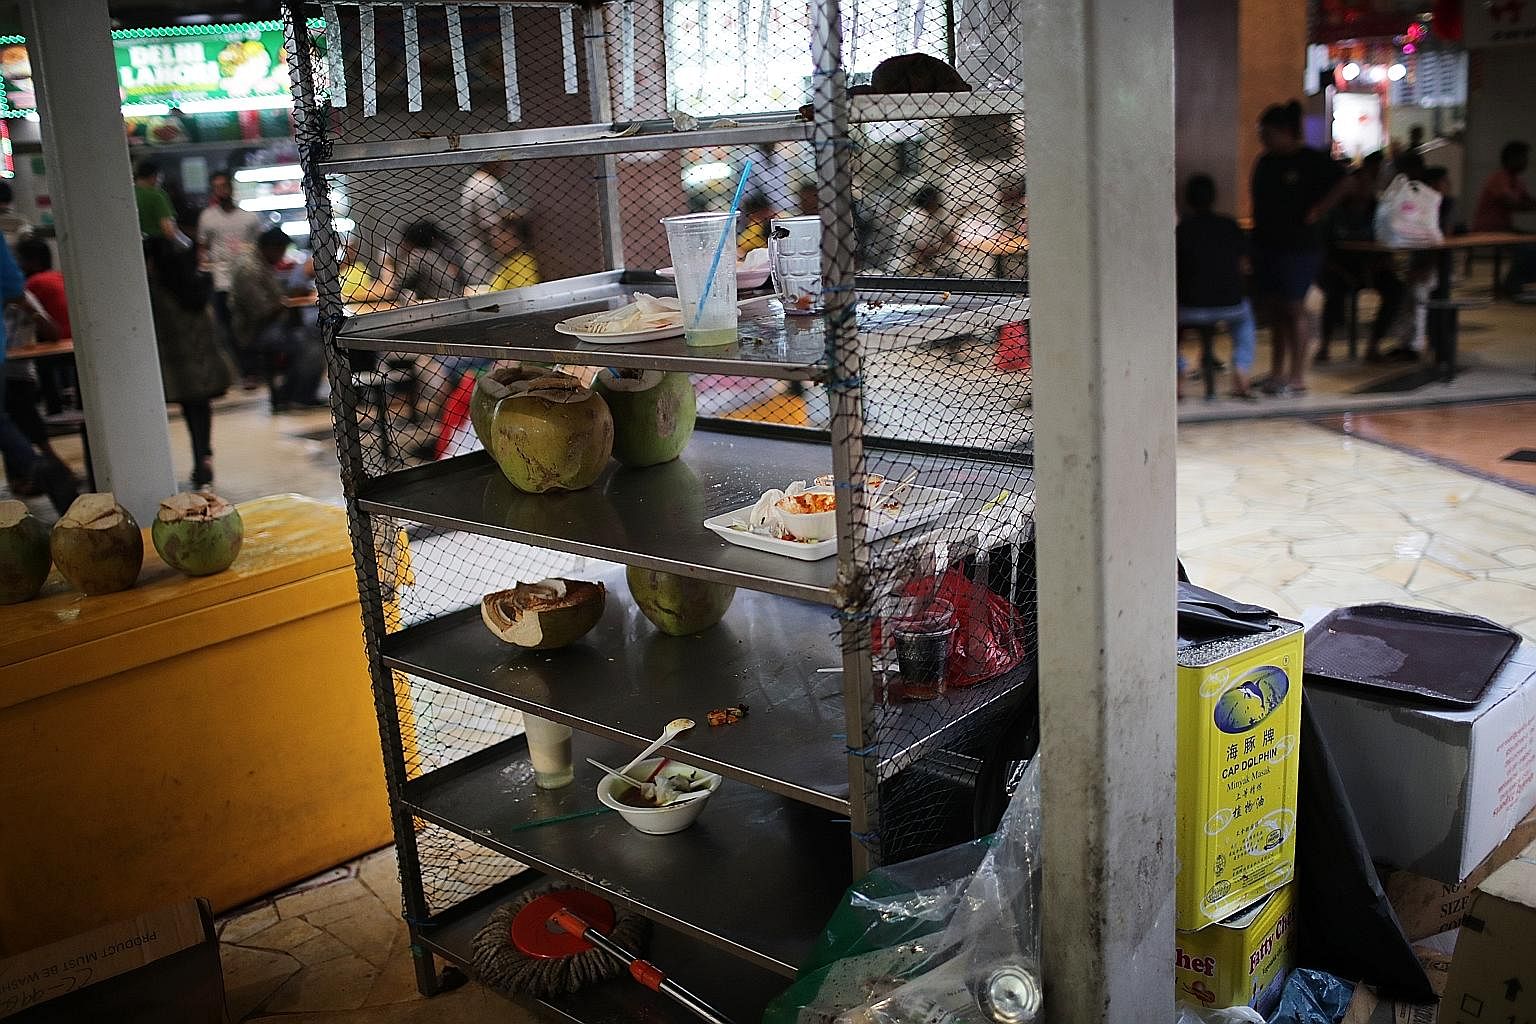 Diners queueing up to wash hands at Tiong Bahru Market before eating or after returning used crockery. ST PHOTO: CHONG JUN LIANG People are still leaving their used crockery, leftovers and used tissue paper behind for workers to clean up after them, 